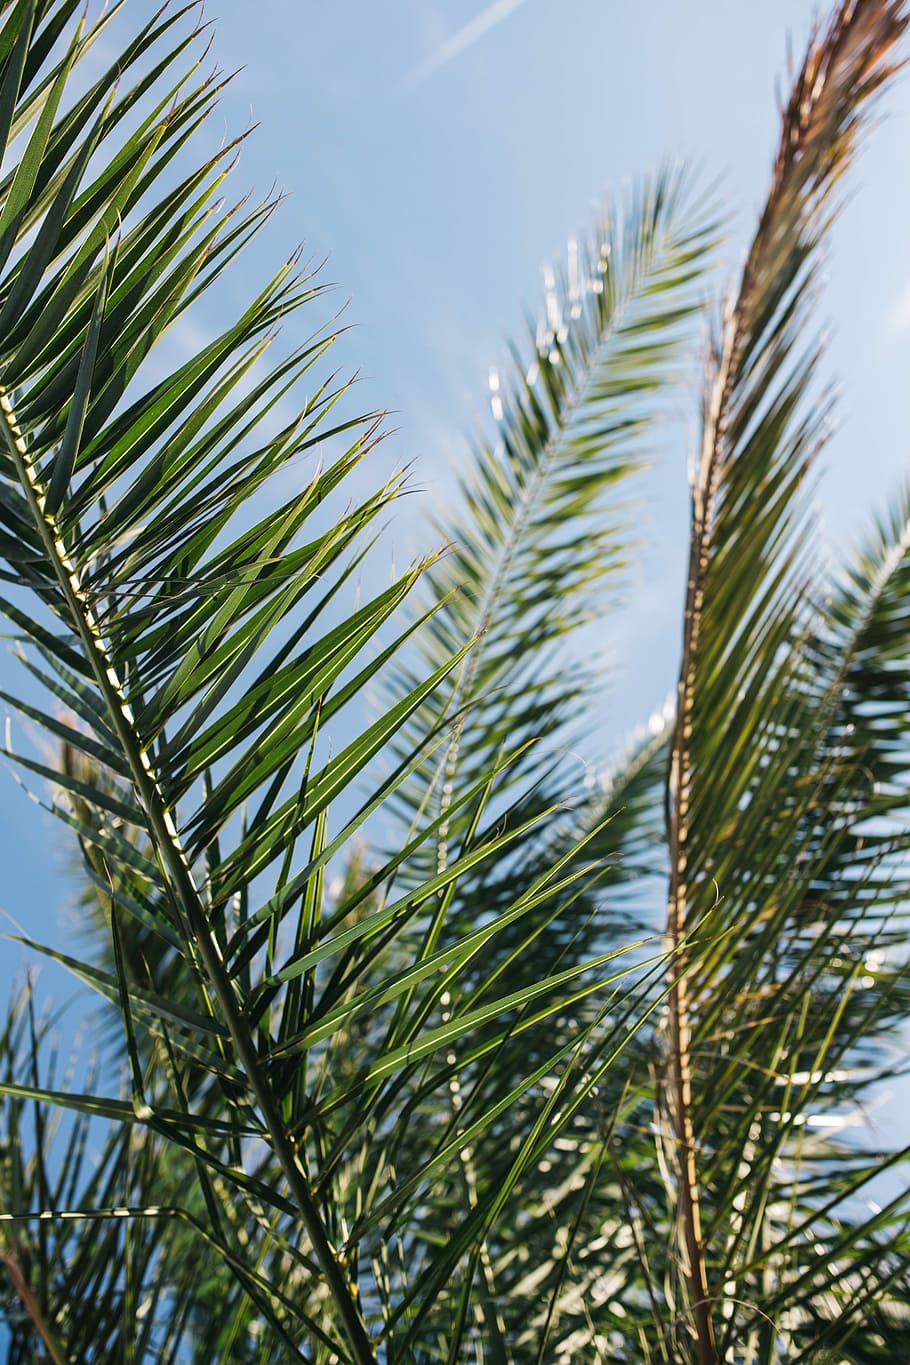 Green palm tree, summer, nature, sky, leaf, leaves, outdoors